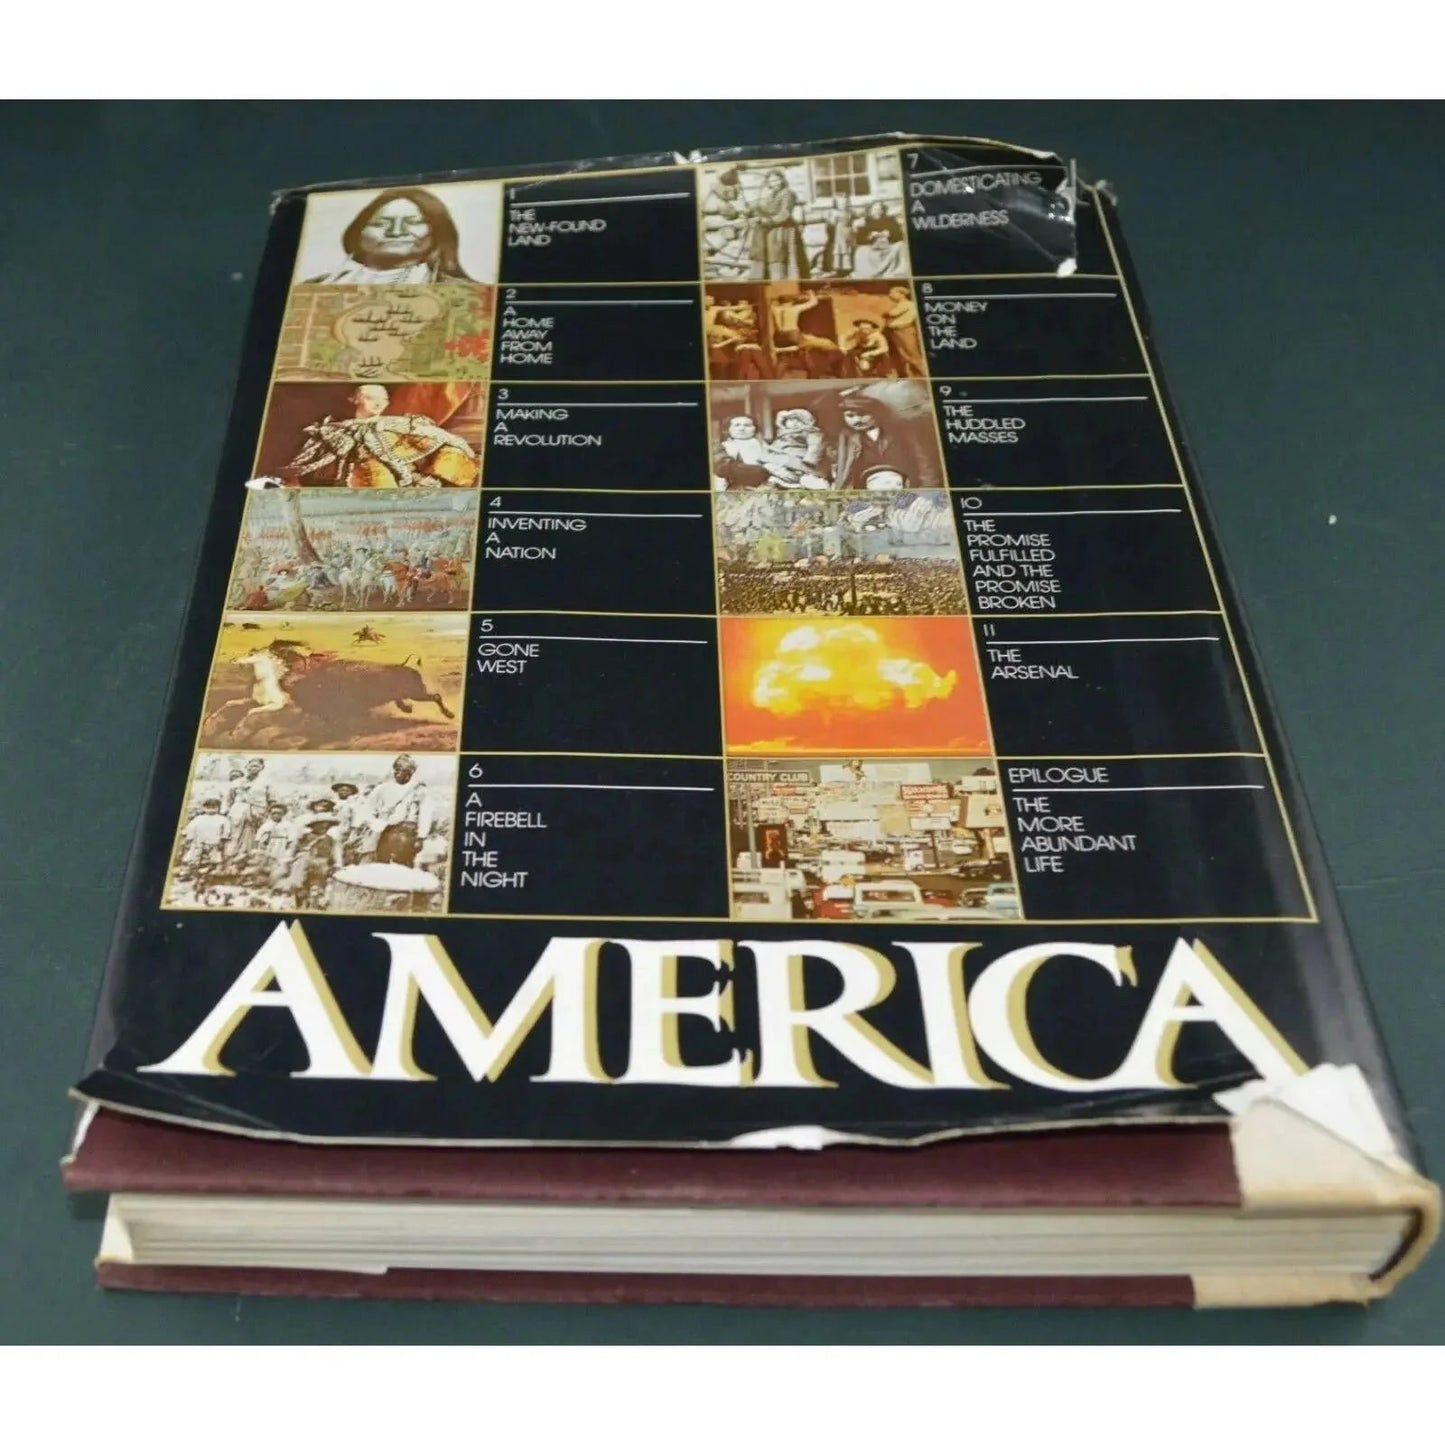 3 SECONDHAND BOOKS ATLAS OF THE WORLD/AMERICA | SECONDHAND BOOKS - TMD167207